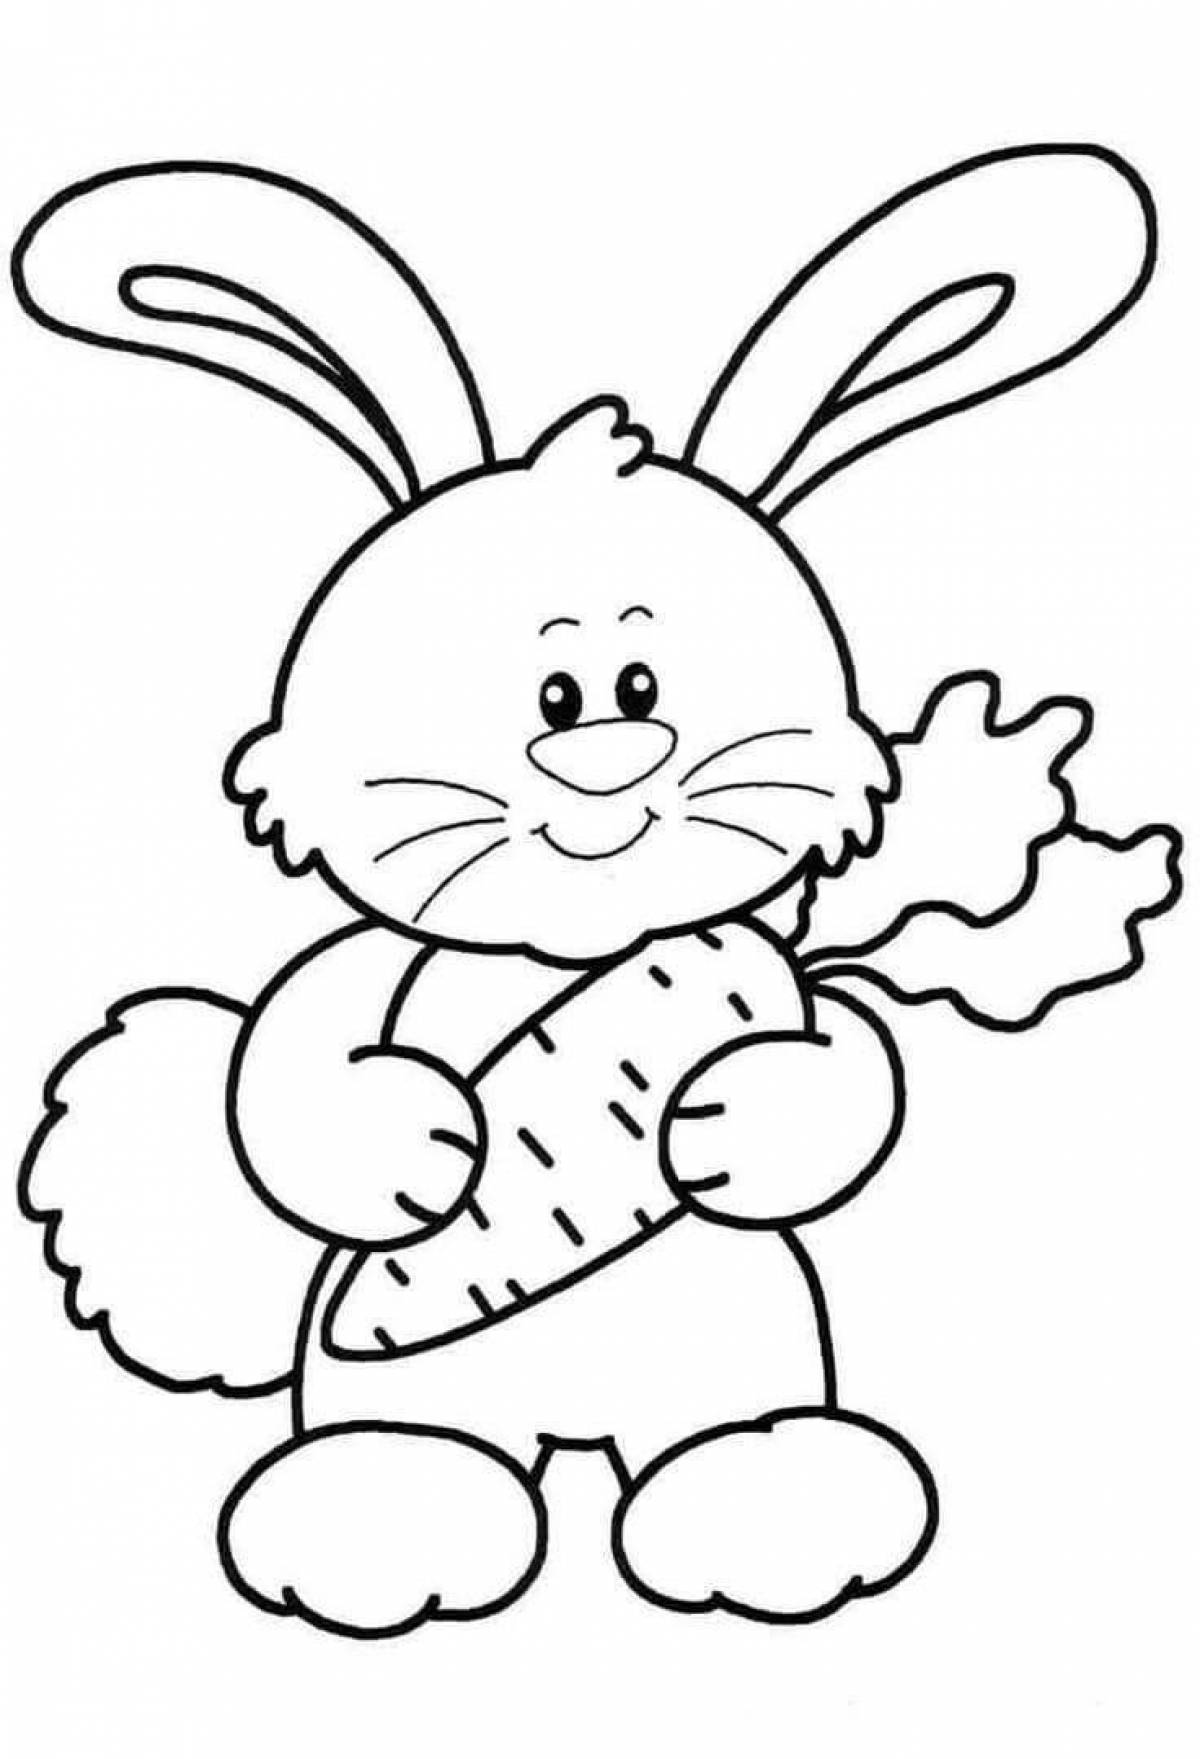 Winking bunny coloring book